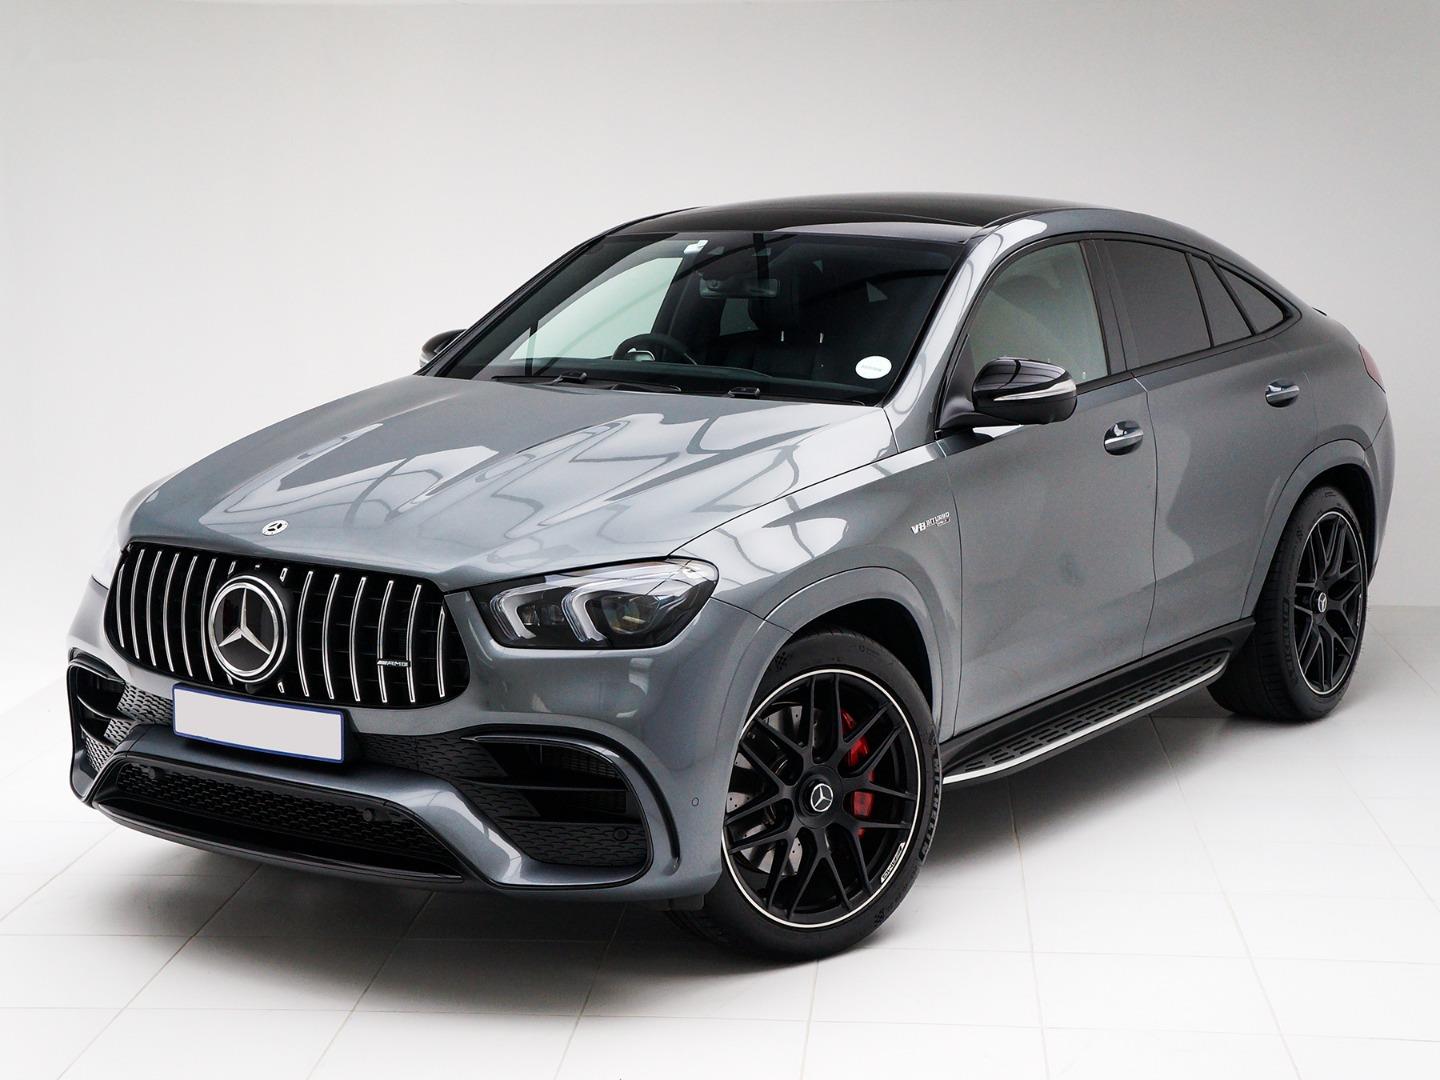 MercedesAMG GLE 63 S Coupe 4Matic+ (2021) review A fashionably late statement Expert